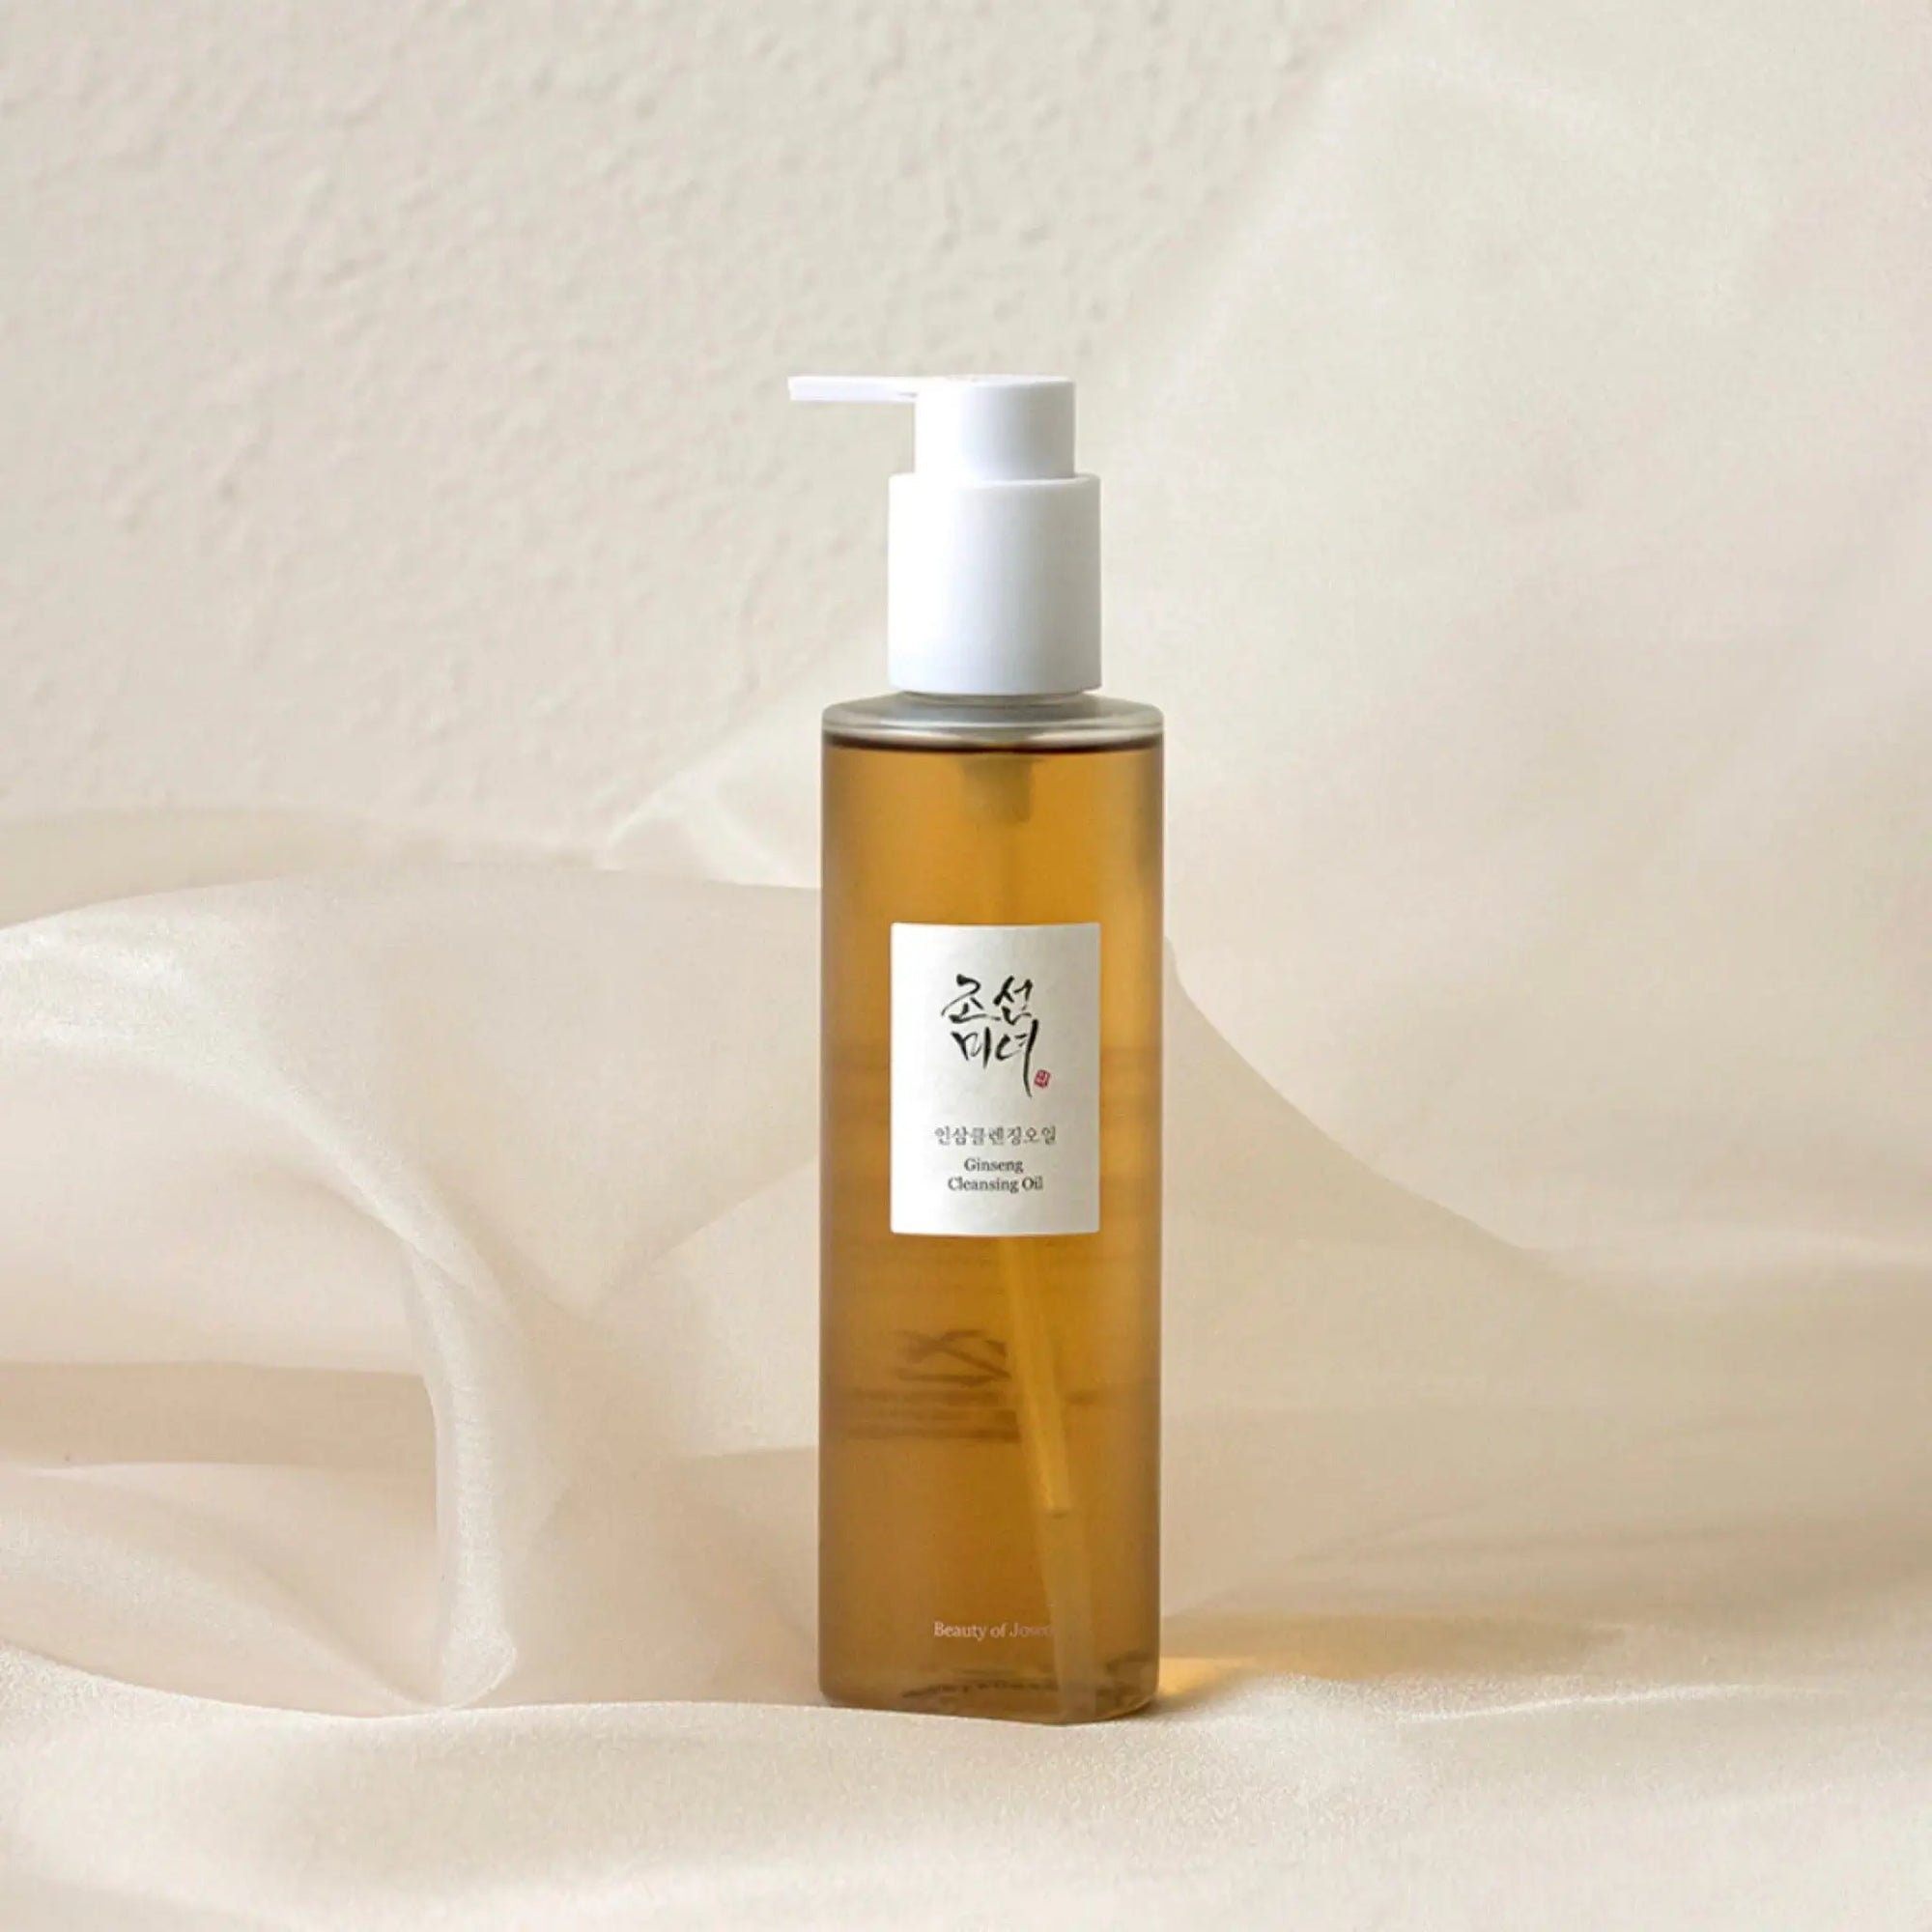 Beauty of Joseon - Ginseng Cleansing Oil 210mL Beauty of Joseon